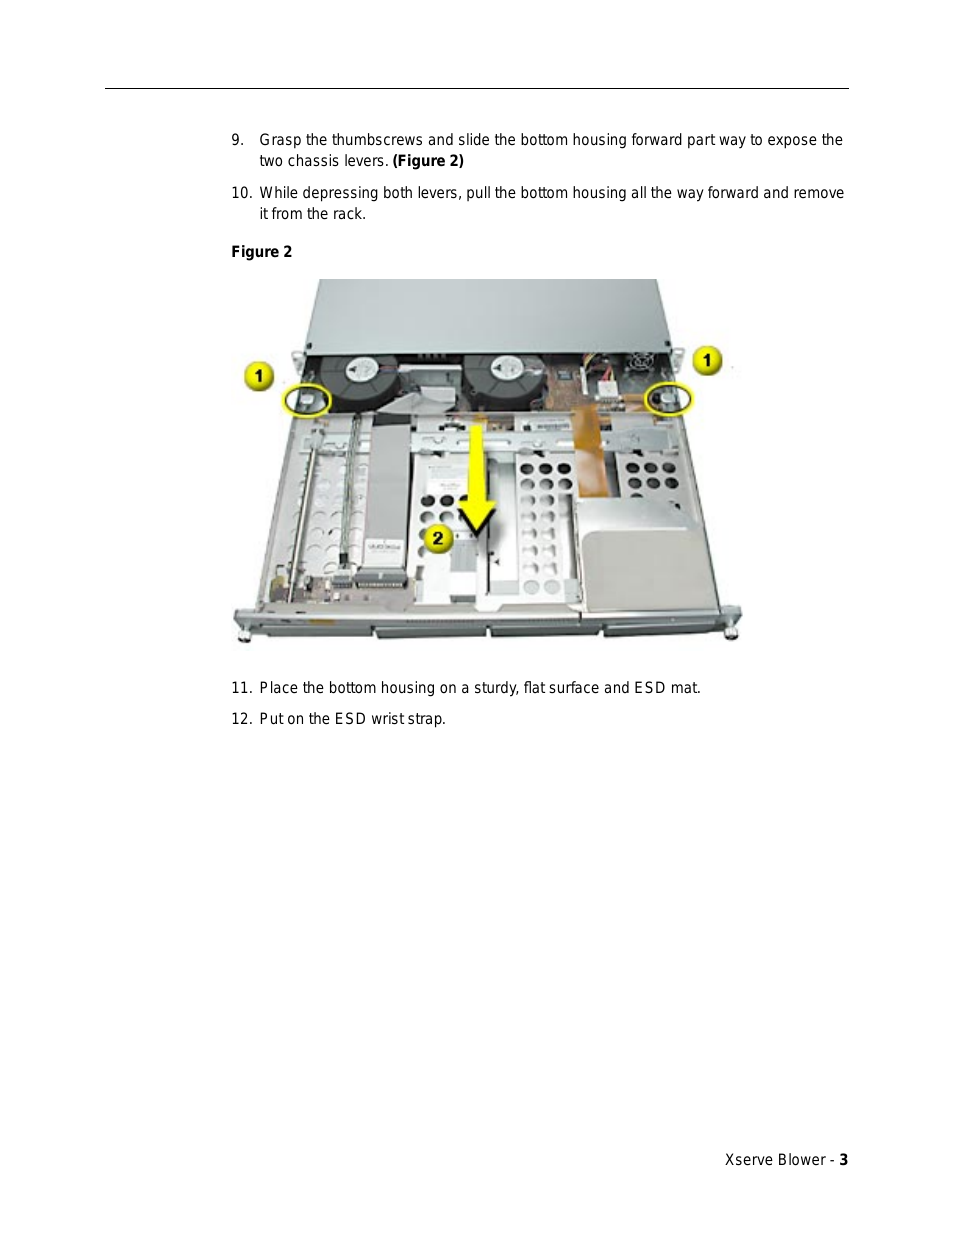 Xserve (Blower Replacement) (Page 3)